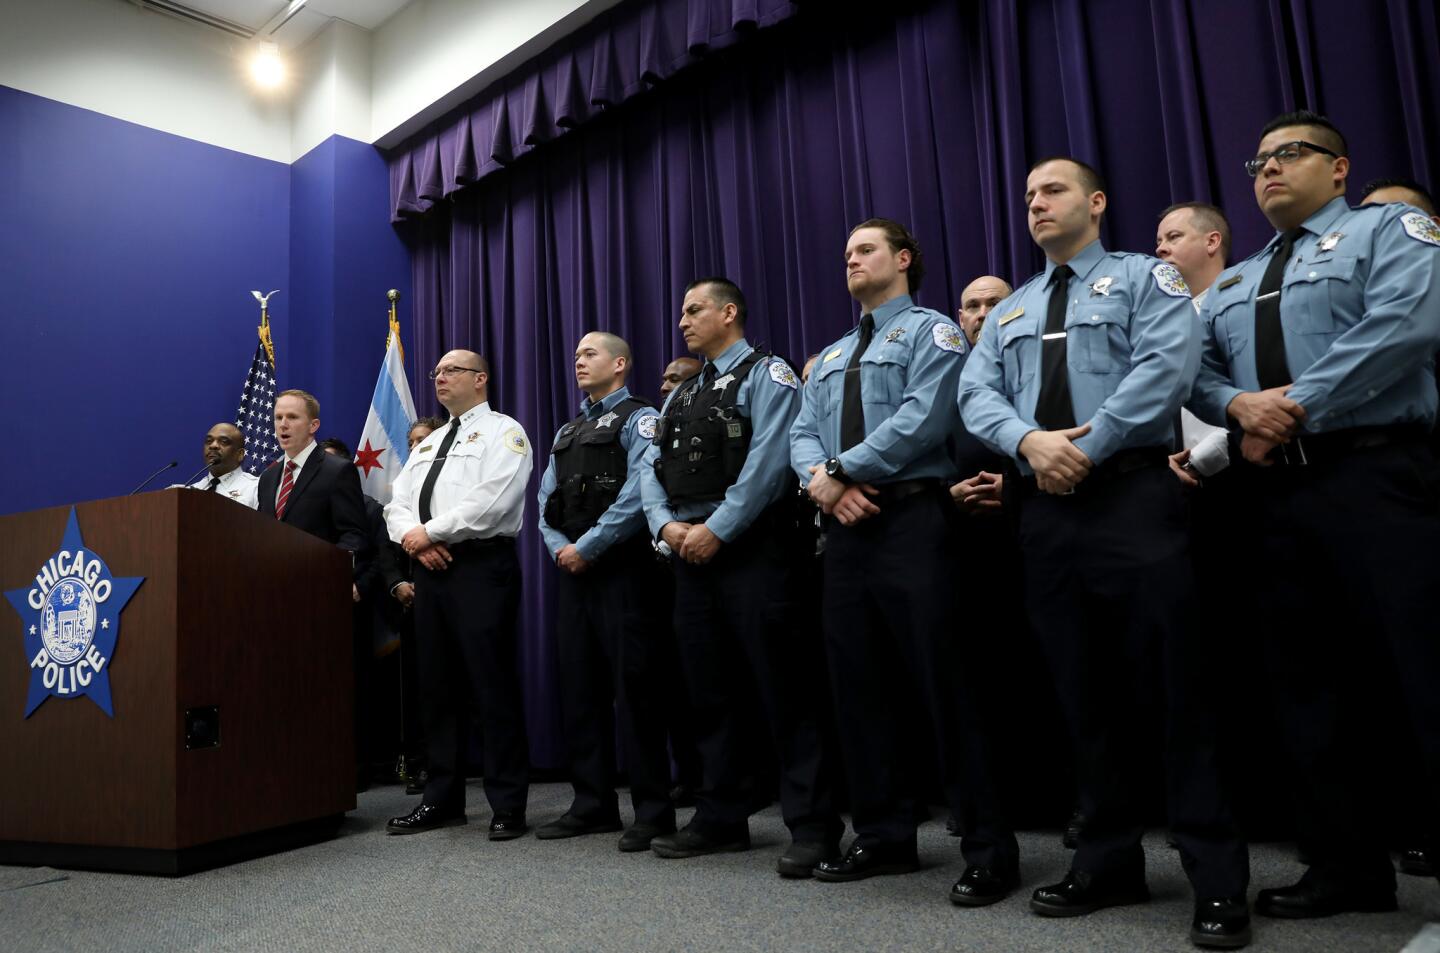 Chicago Police Department Superintendent Eddie Johnson stands with 10th District officers as he talks with reporters about charging the first of several juvenile offenders from the March 19 criminal sexual assault incident broadcast on Facebook Live, during a press conference Sunday April 2, 2017 at the City of Chicago Public Safety Headquarters.